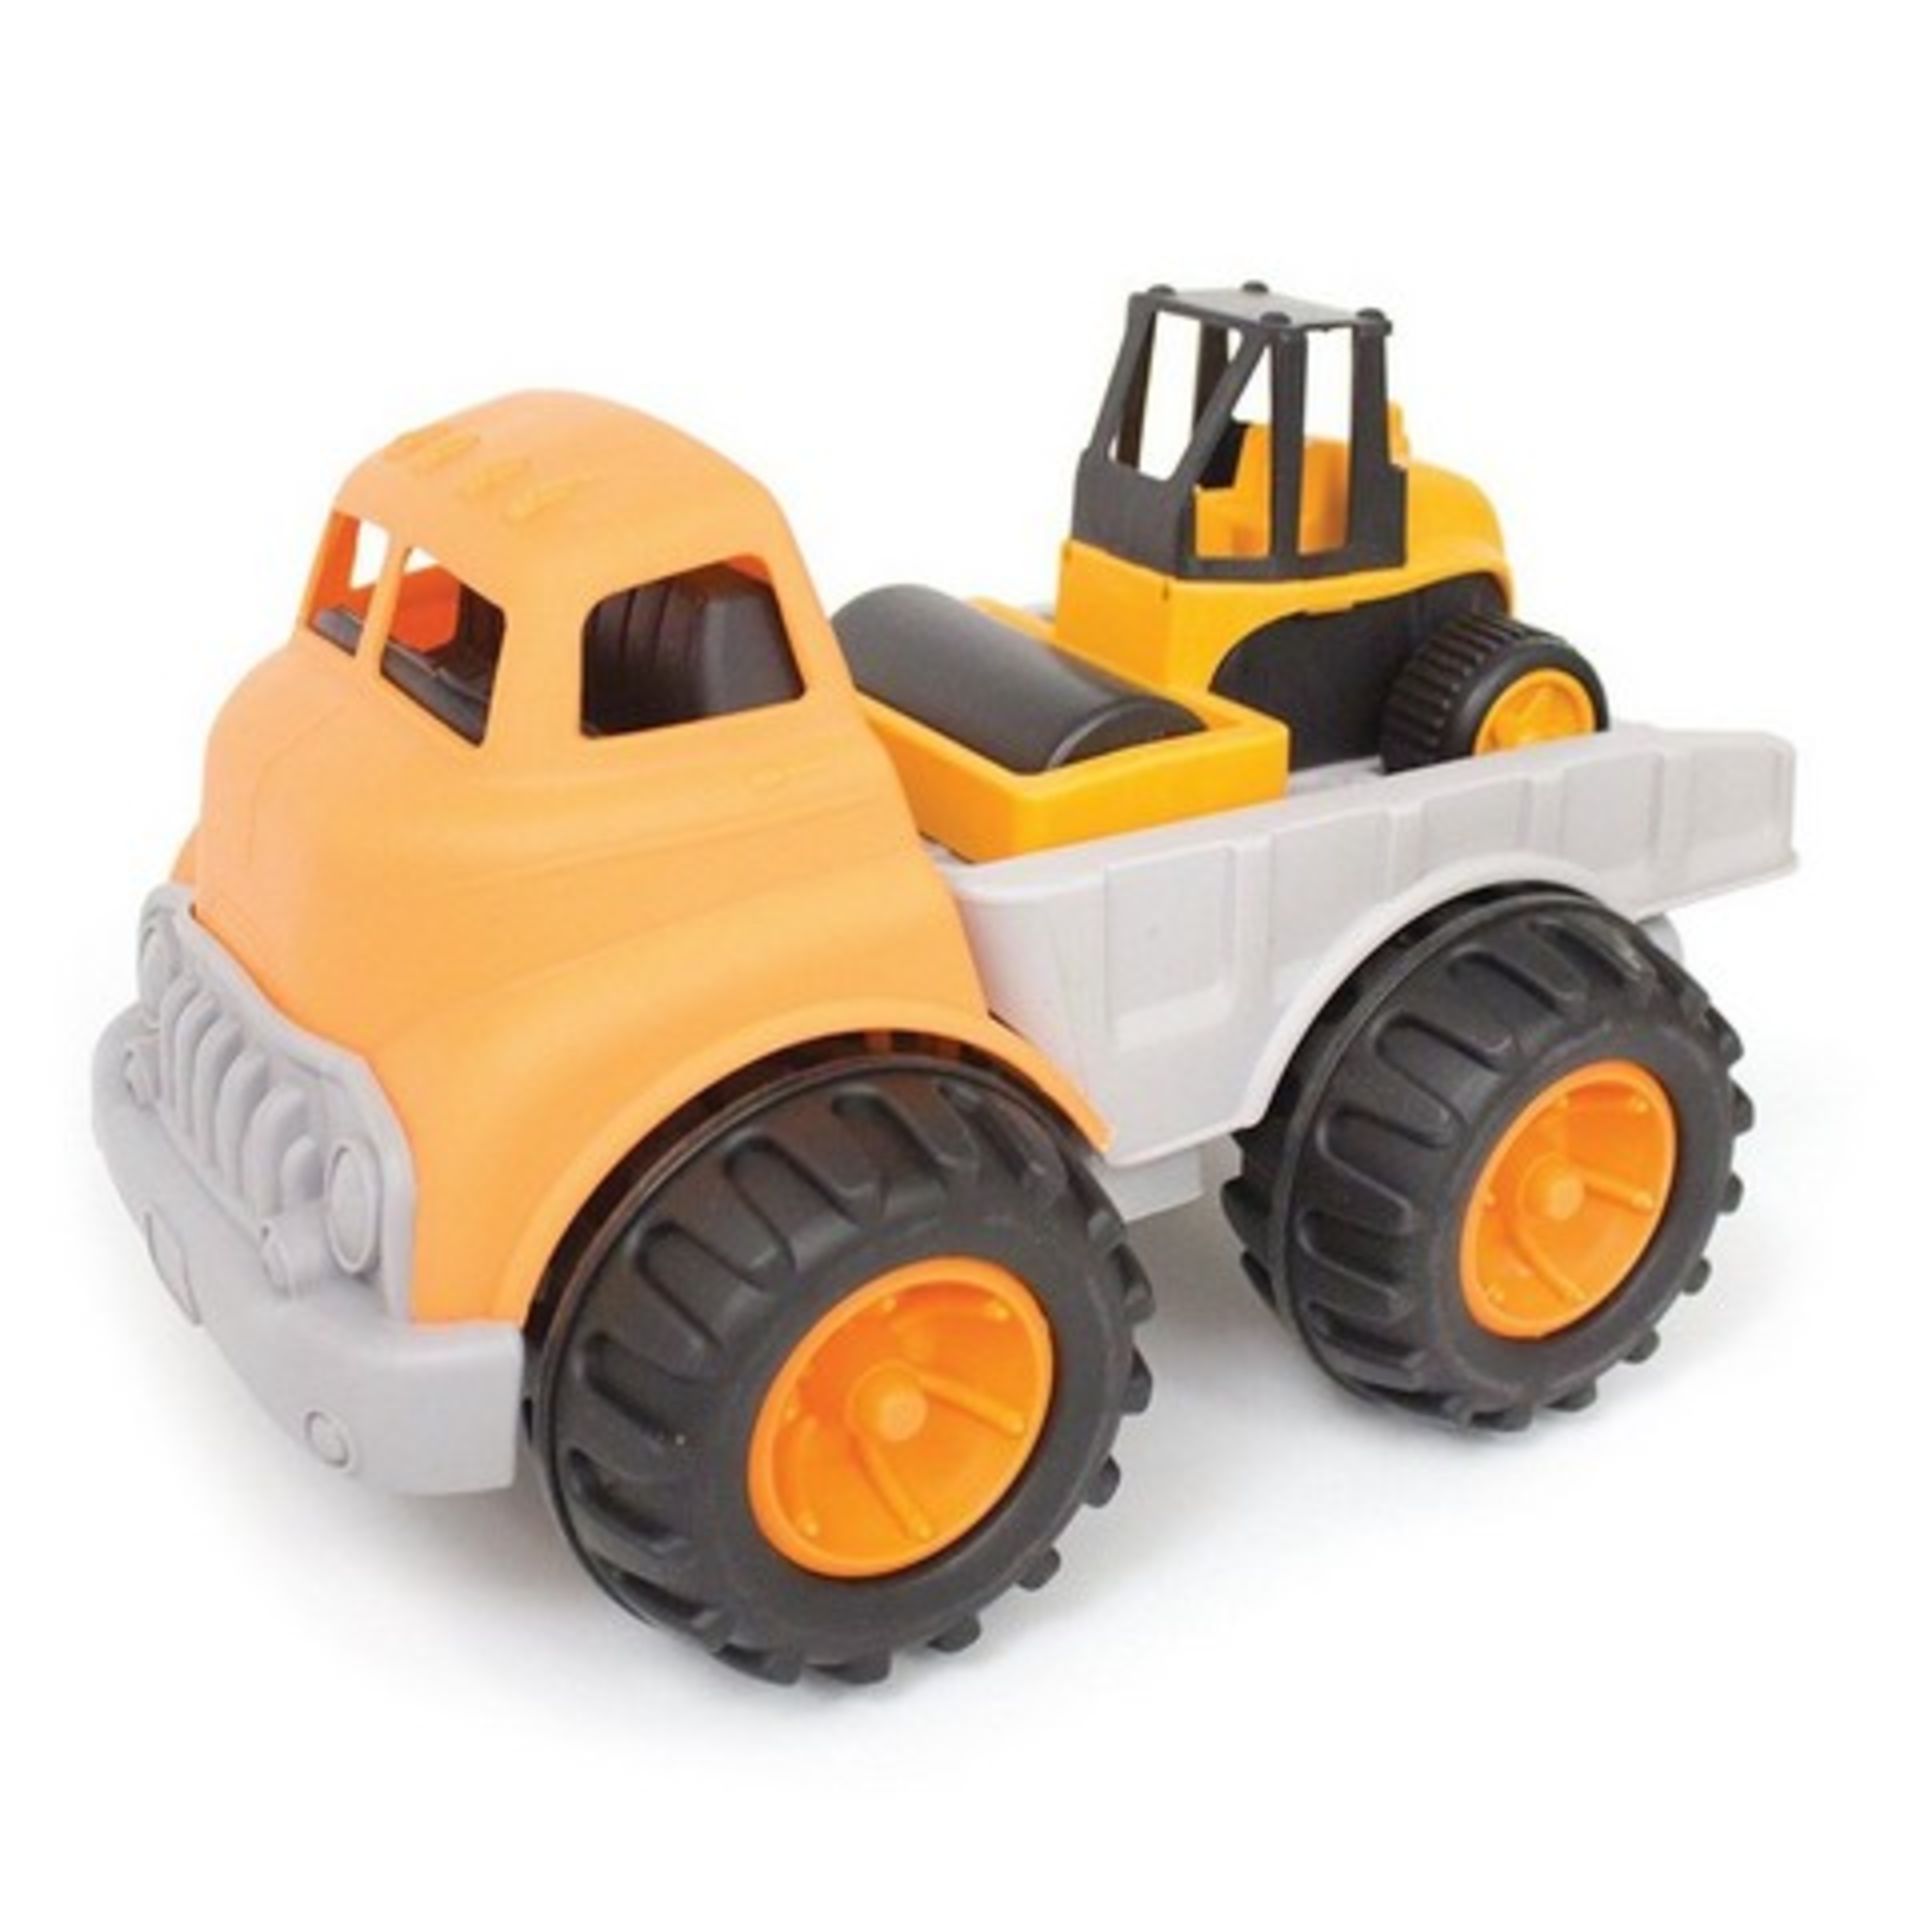 + VAT Brand New Big Play Truck Construction Engineering Brigade Vehicle Set - Ideal For Sandpit - Image 2 of 4